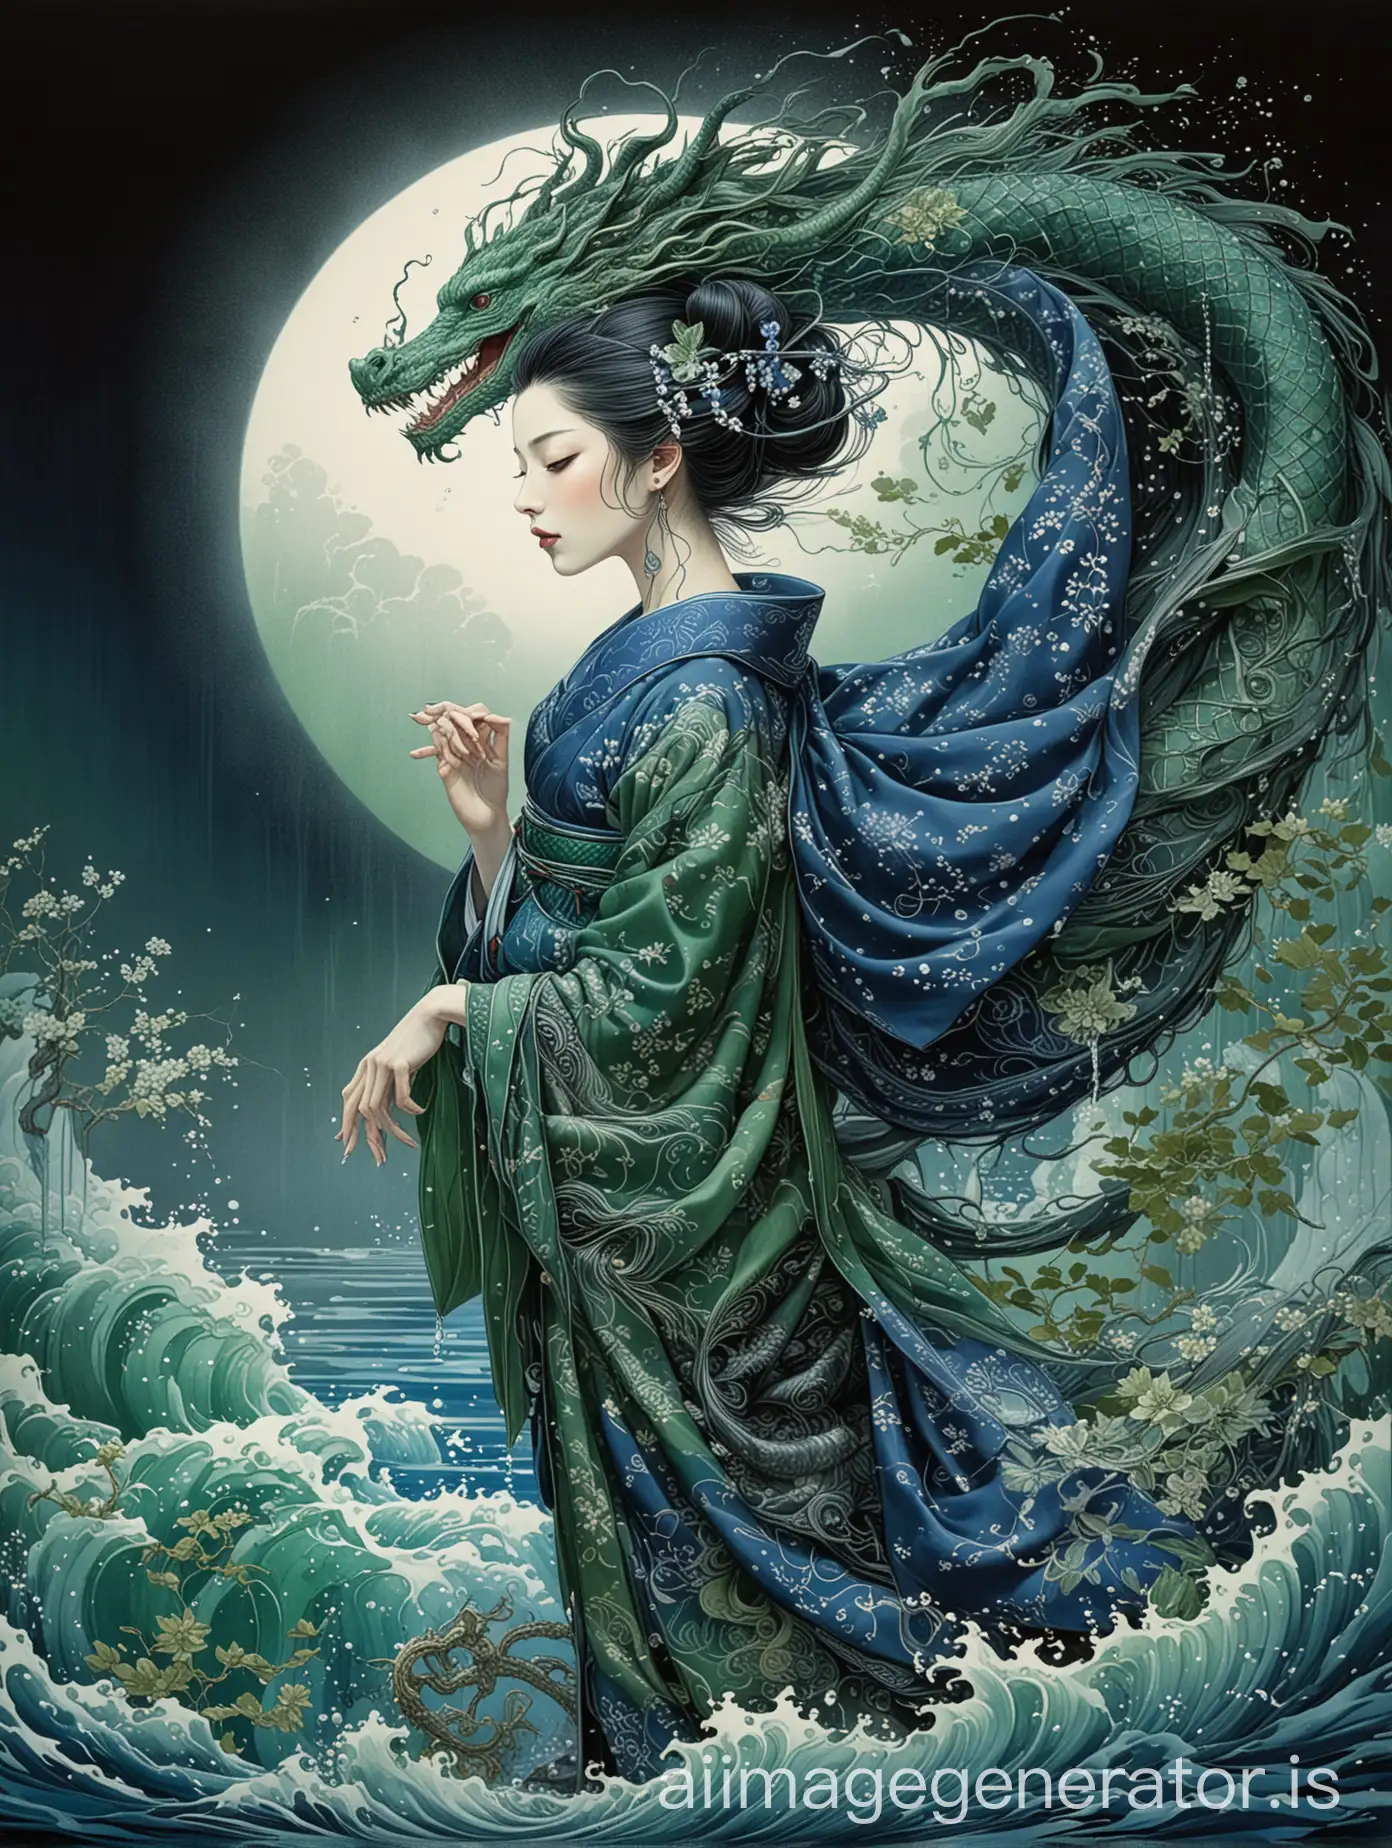 Yoshitaka Amano art style, Kay Nielsen style, woman in intricate  blue kimono with green embroidery, emerging from water, embracing a japanese style dragon with blue and green scales, fullmoon in the background